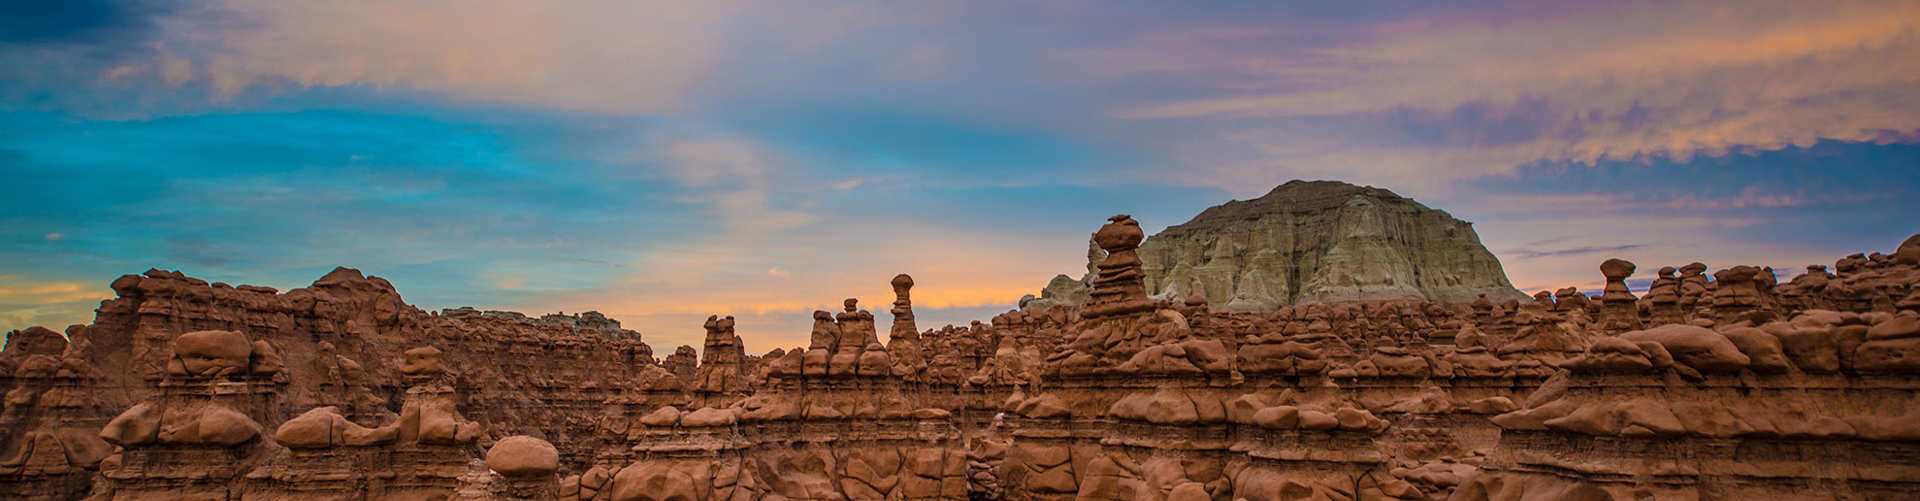 Privacy Policy Hero Image - Image of red rocks in southern Utah.